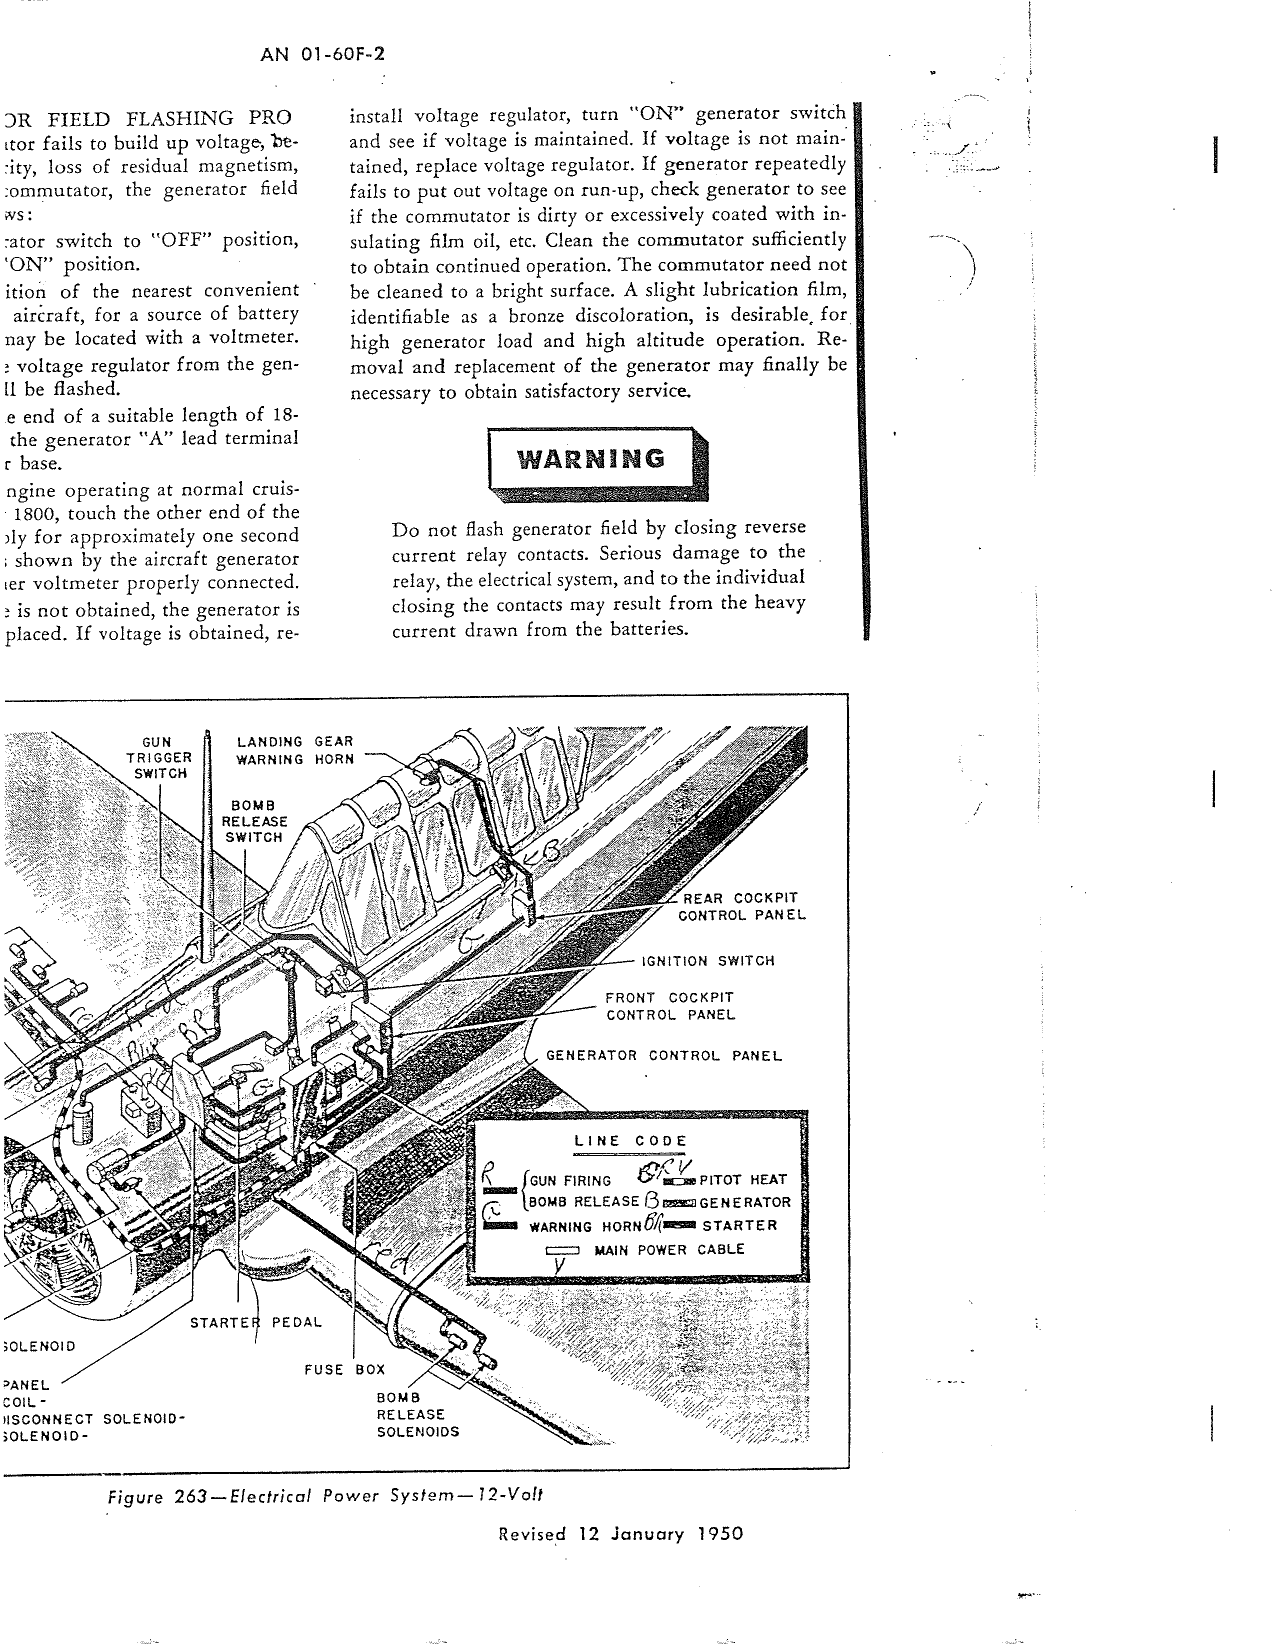 Sample page 265 from AirCorps Library document: Erection & Maintenance - T-6C, T-6D, SNJ-3, SNJ-4, SNJ-5, SNJ-6